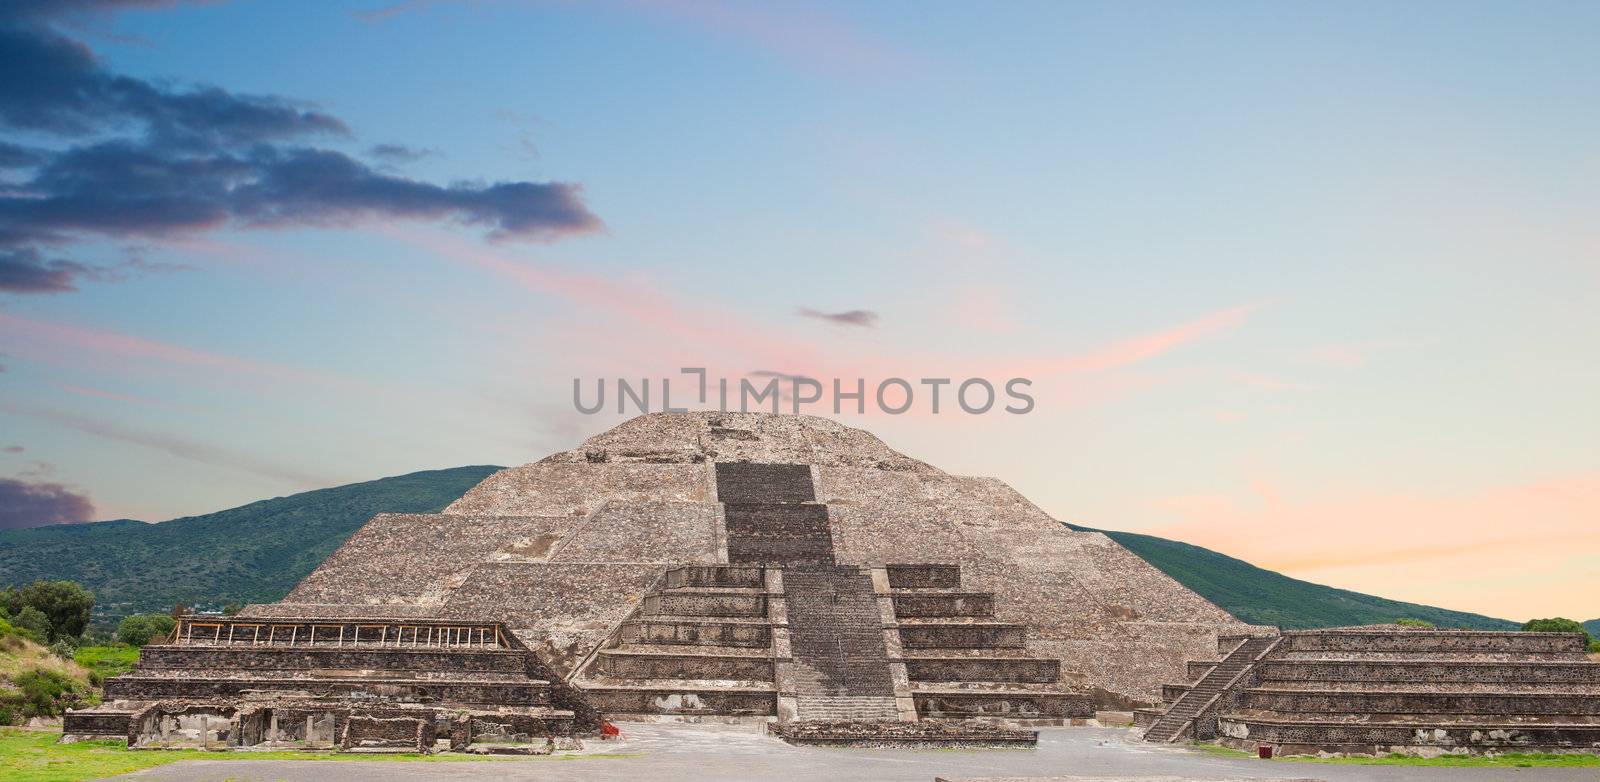 Ancient city ofTeotihuacan, pyramid of the moon, Mexico.